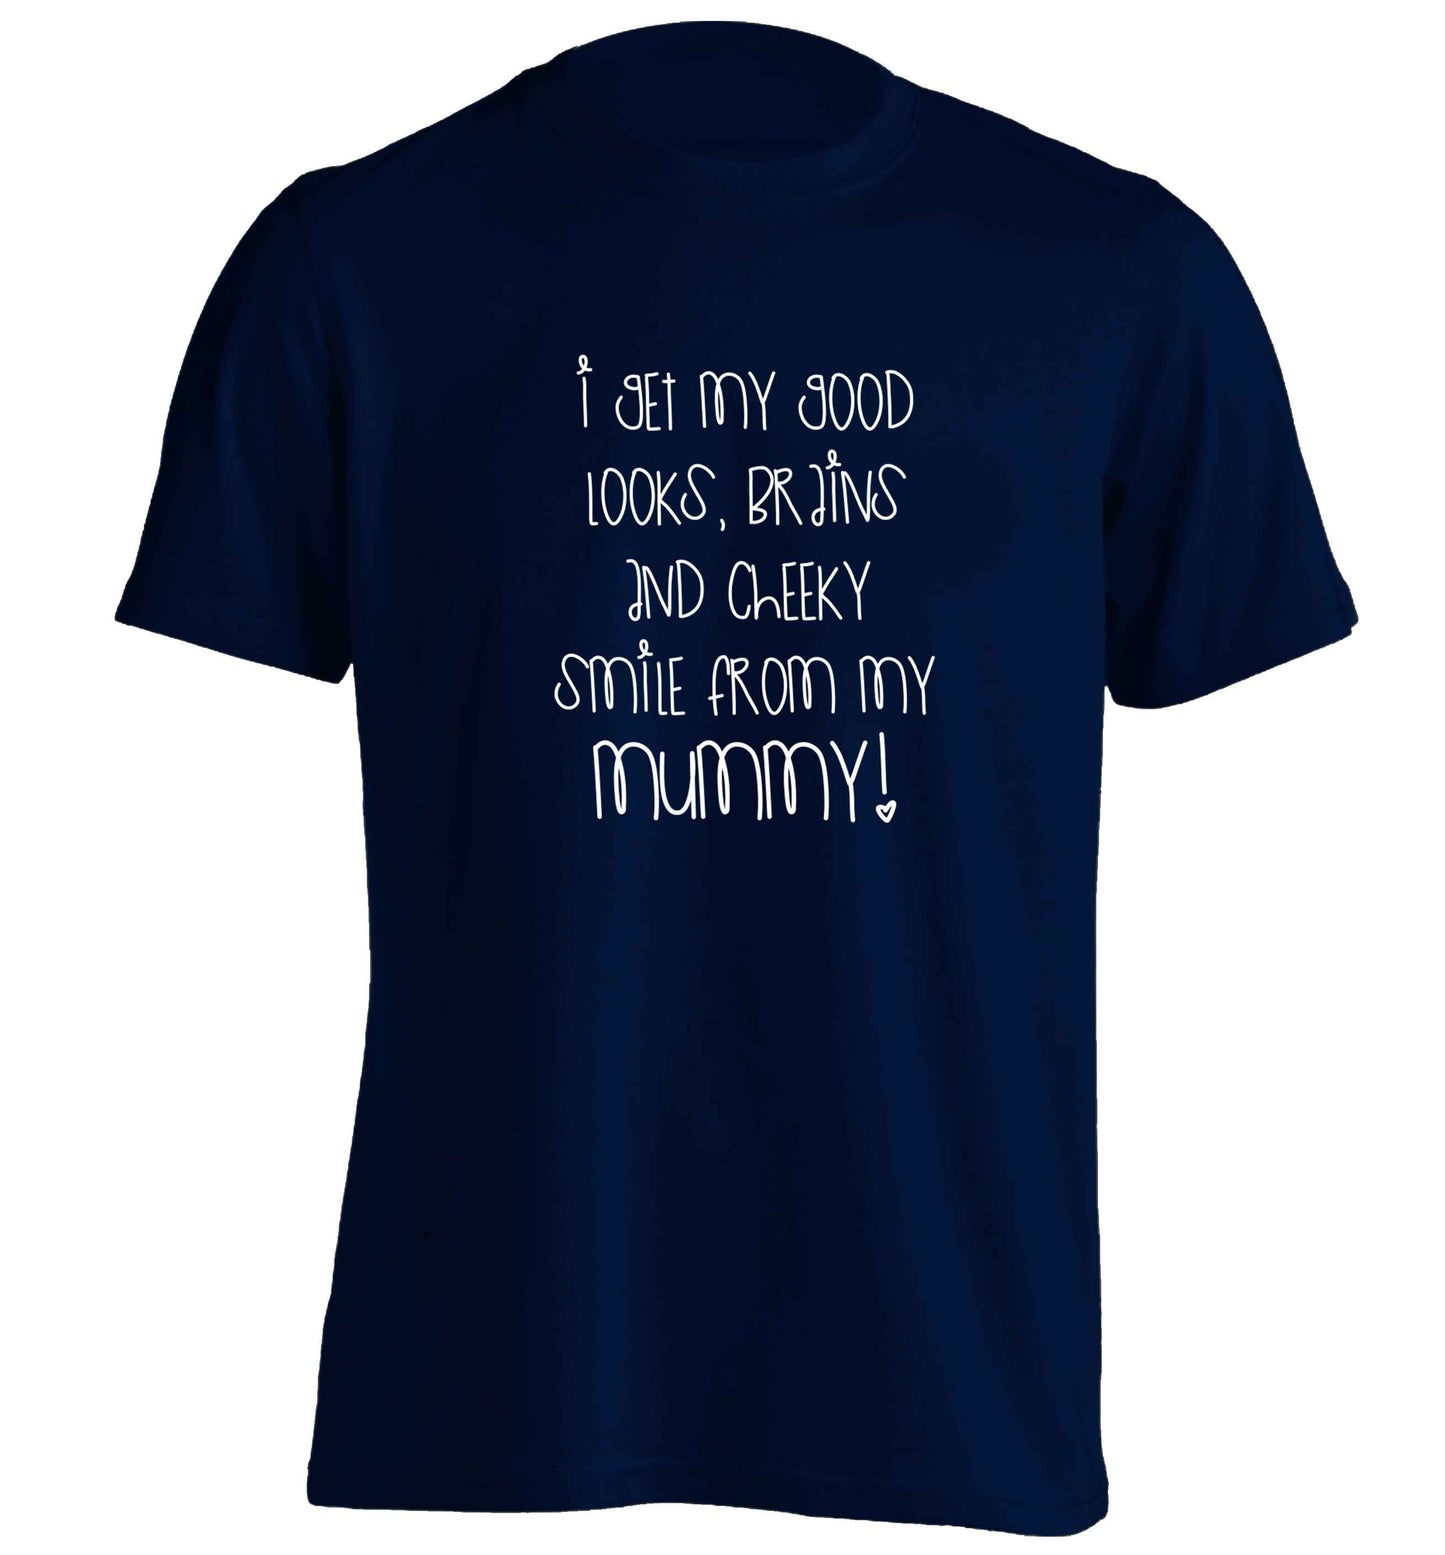 I get my good looks, brains and cheeky smile from my mummy adults unisex navy Tshirt 2XL